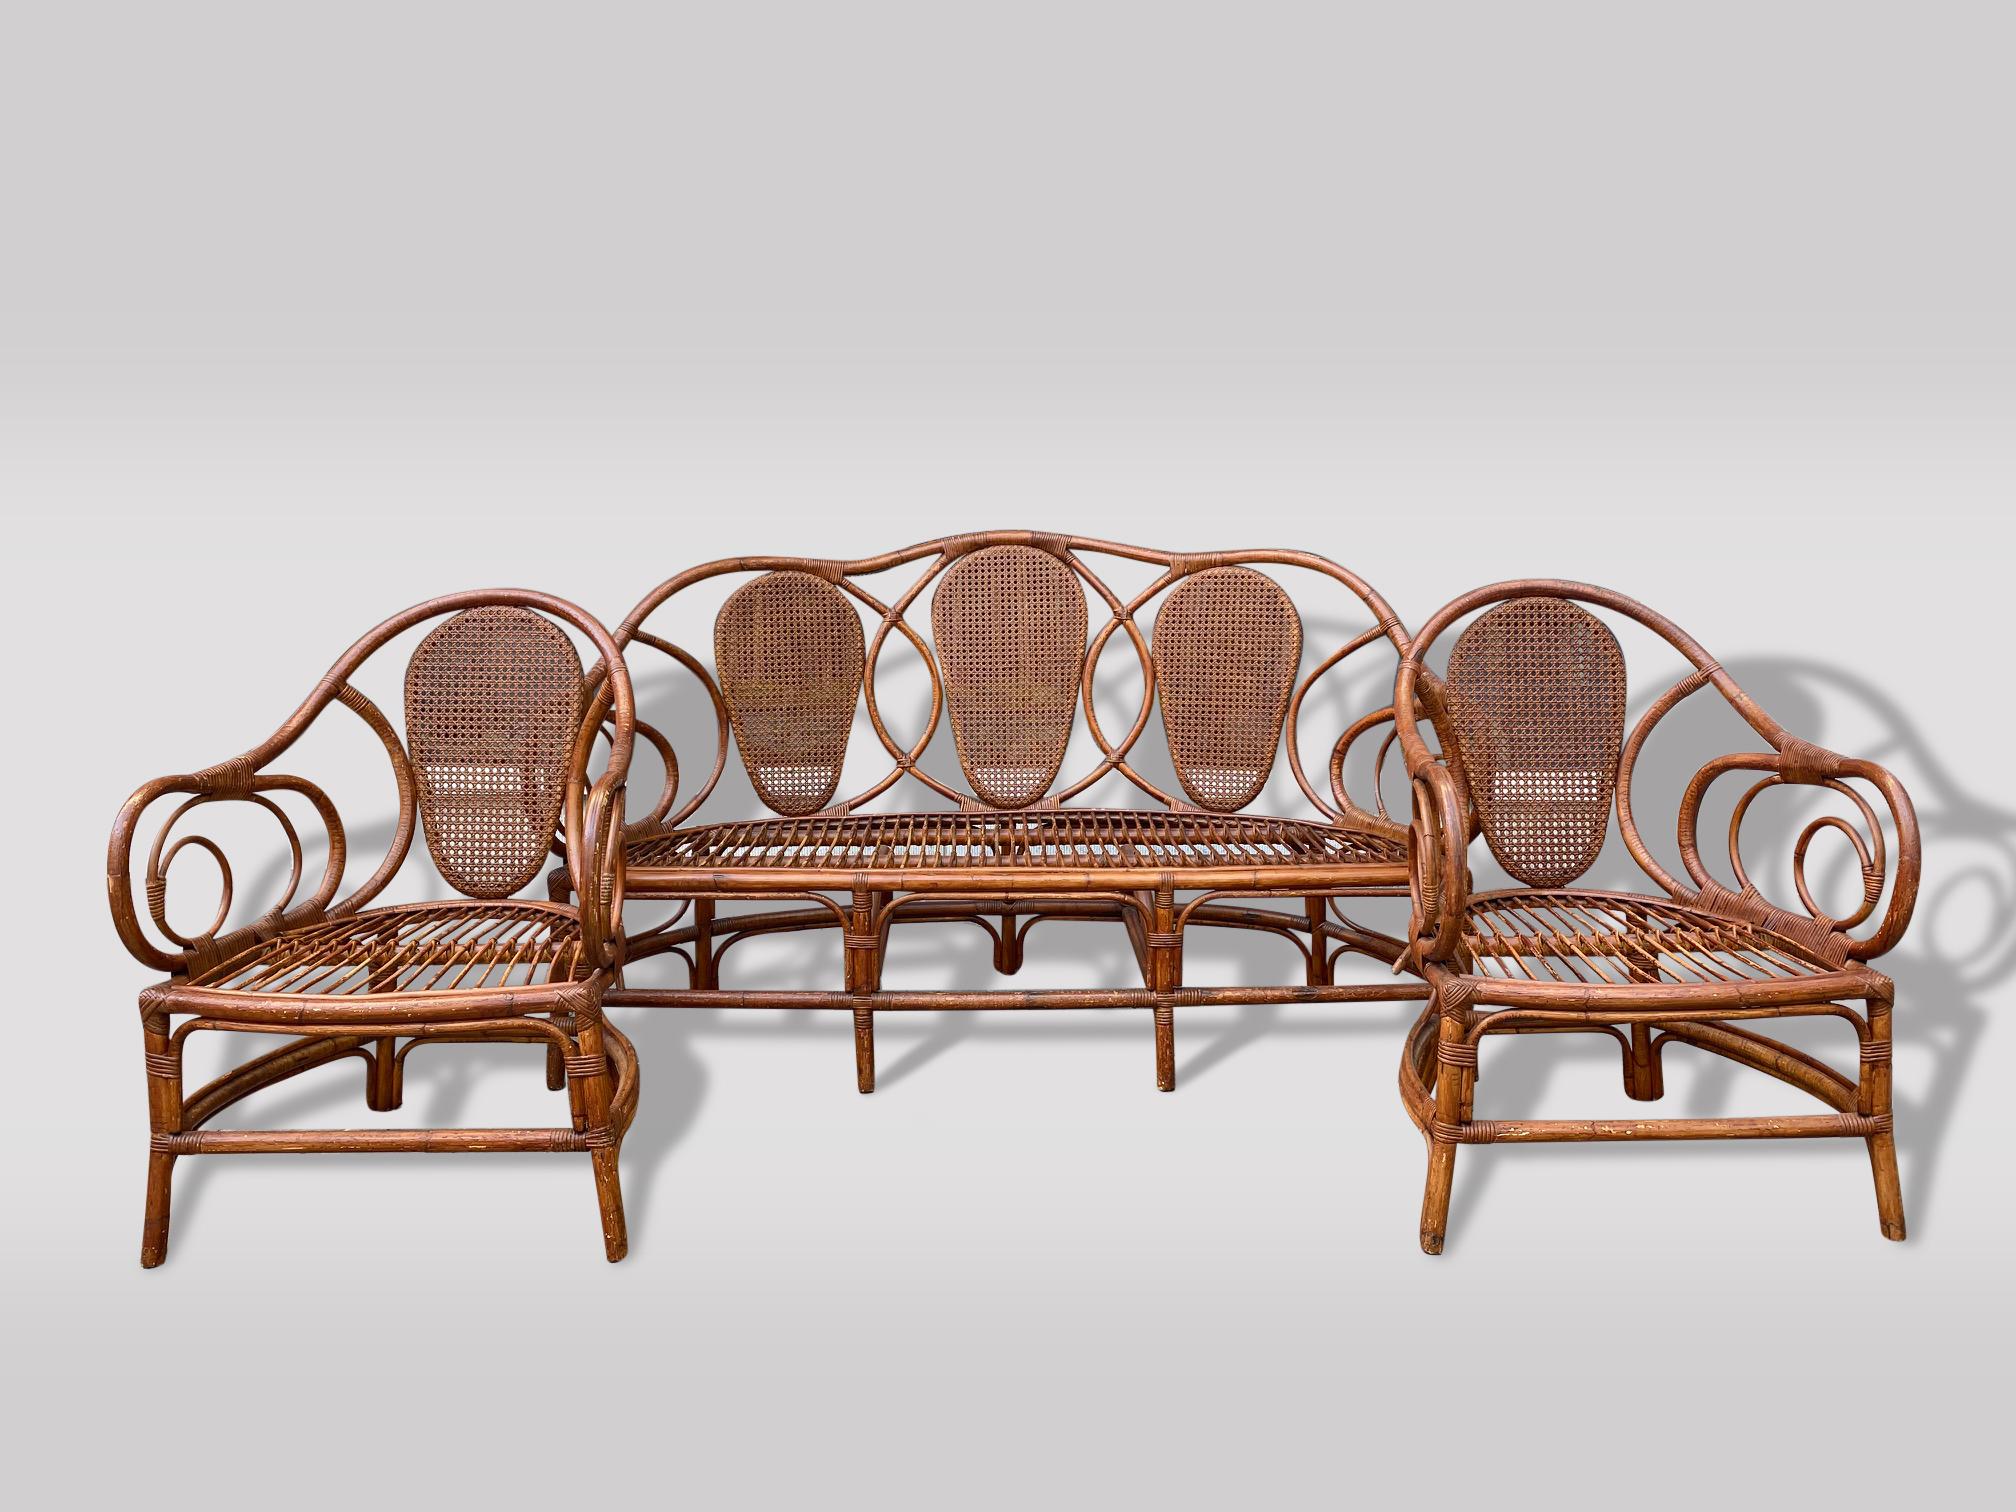 A rare and spectacular mid 20th century 3 piece bentwood garden lounge furniture set of charm features bamboo & rattan structure with cane circular shaped backs. Comprising a three seater settee with circular shaped back, scrolling arms upon